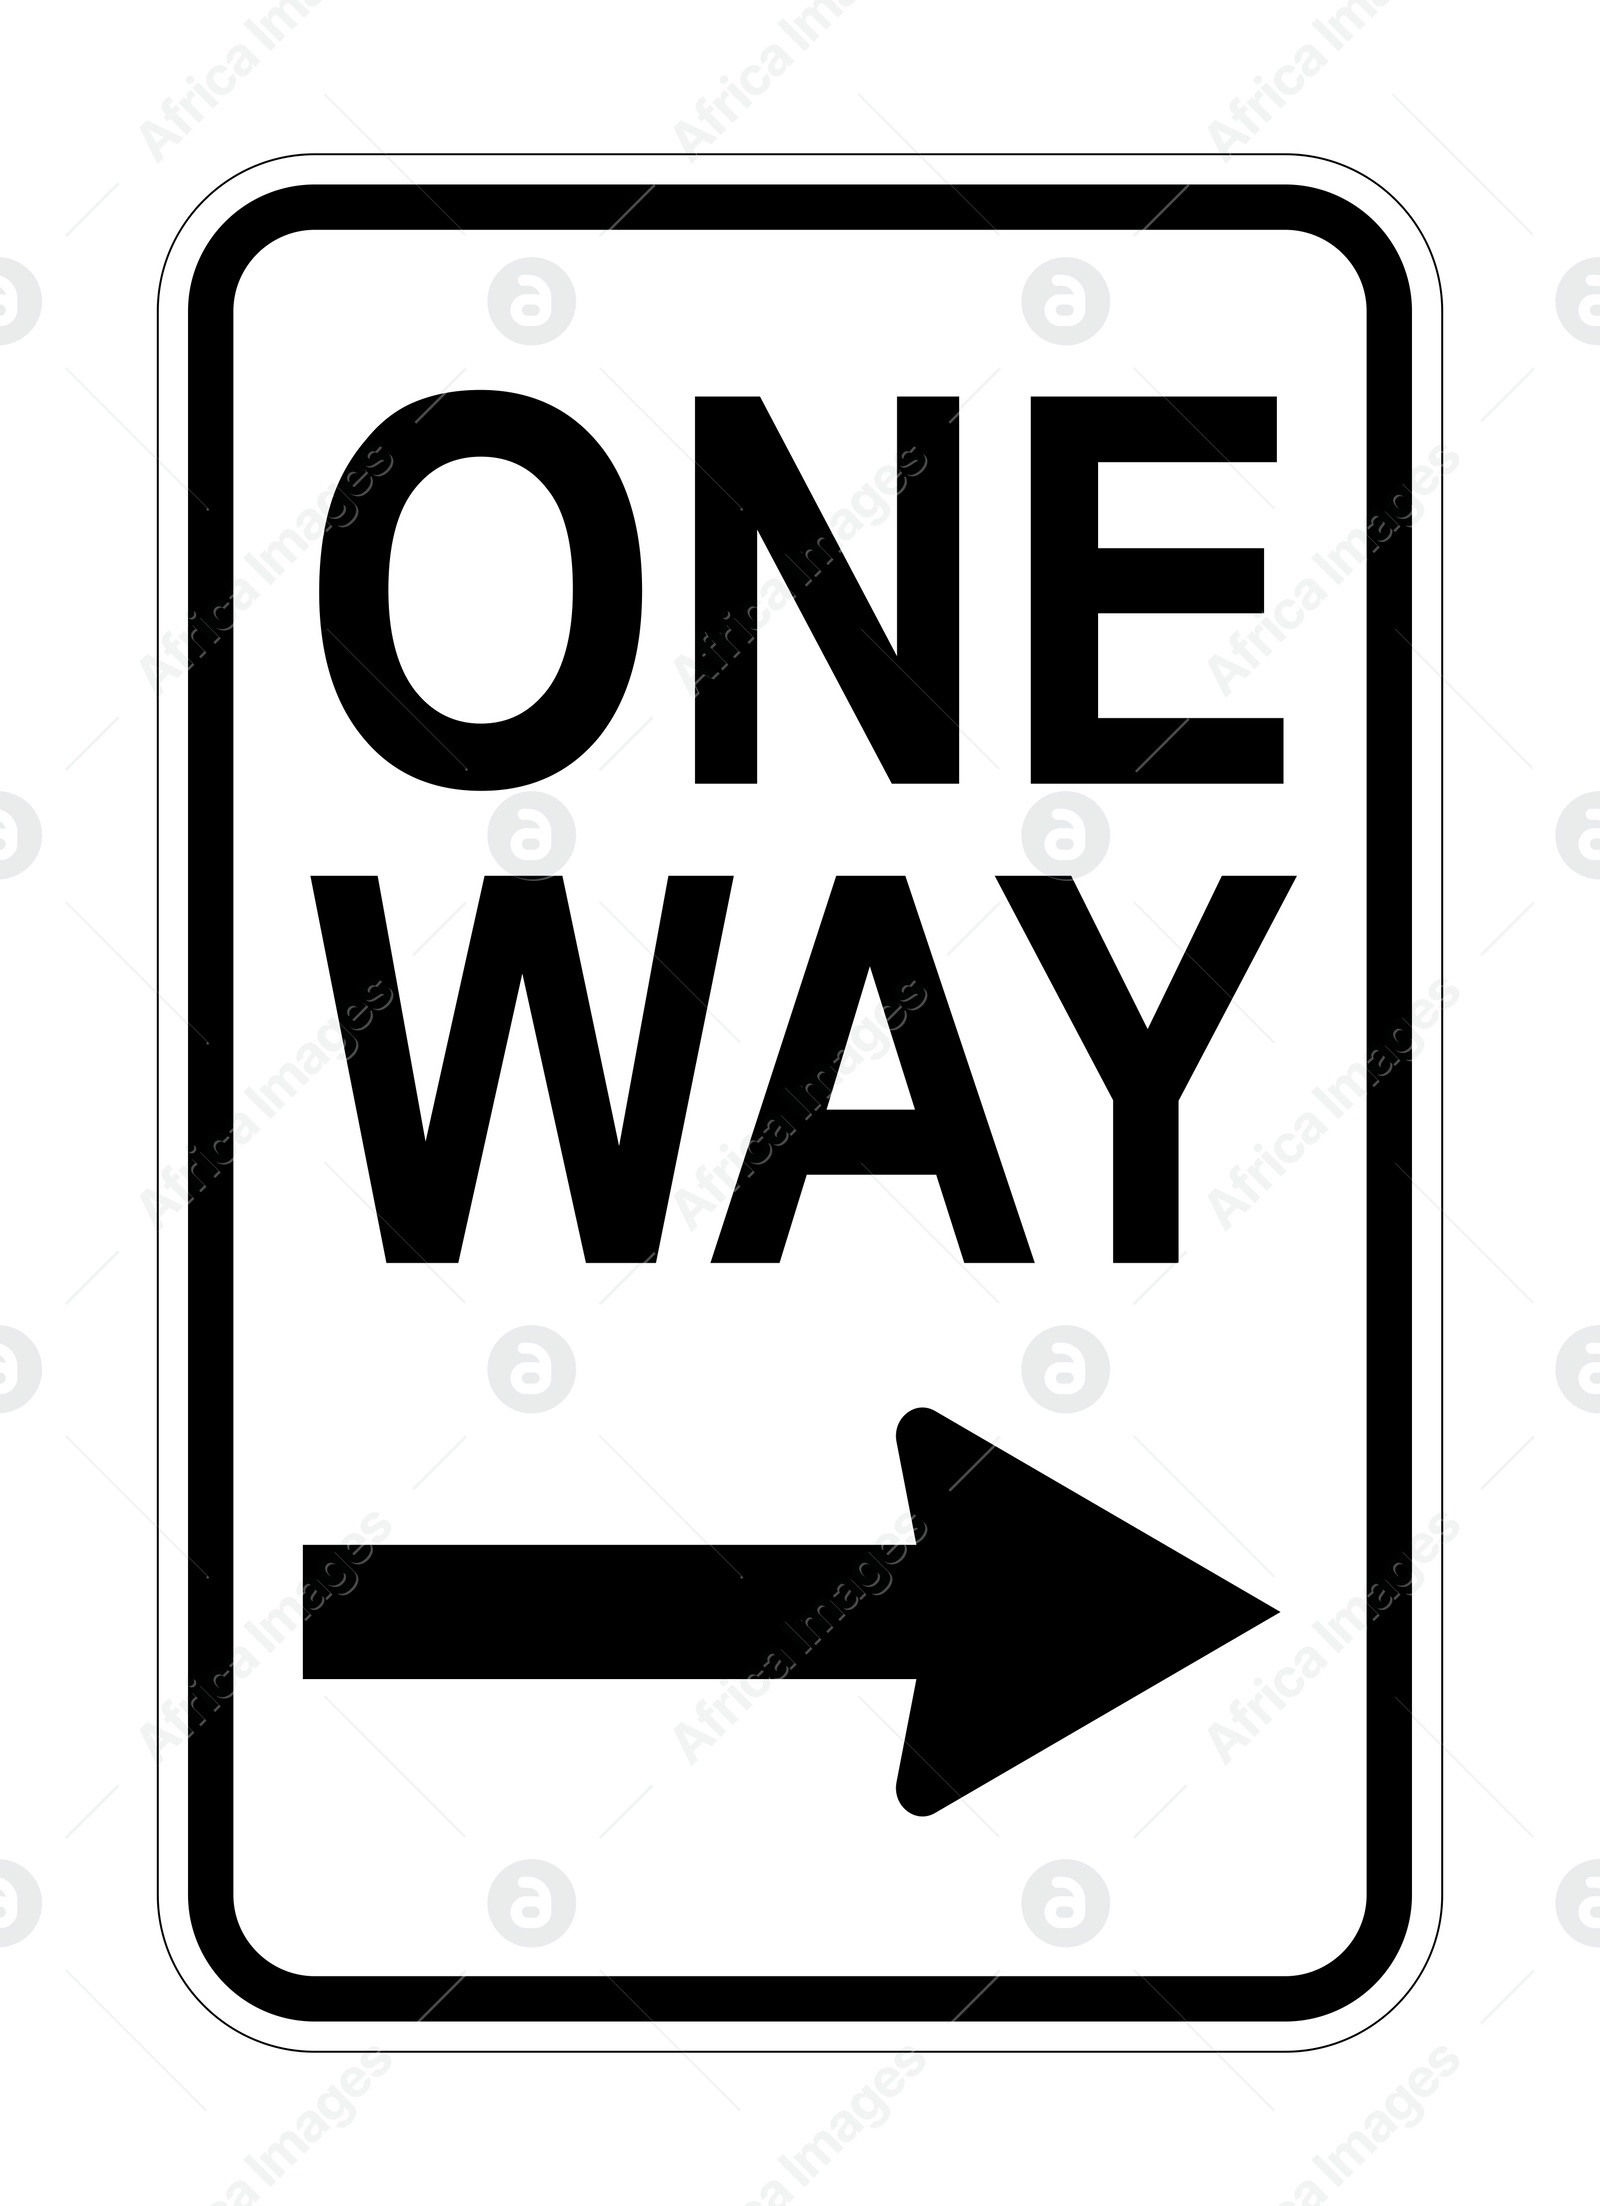 Illustration of Traffic sign ONE WAY and arrow on white background, illustration